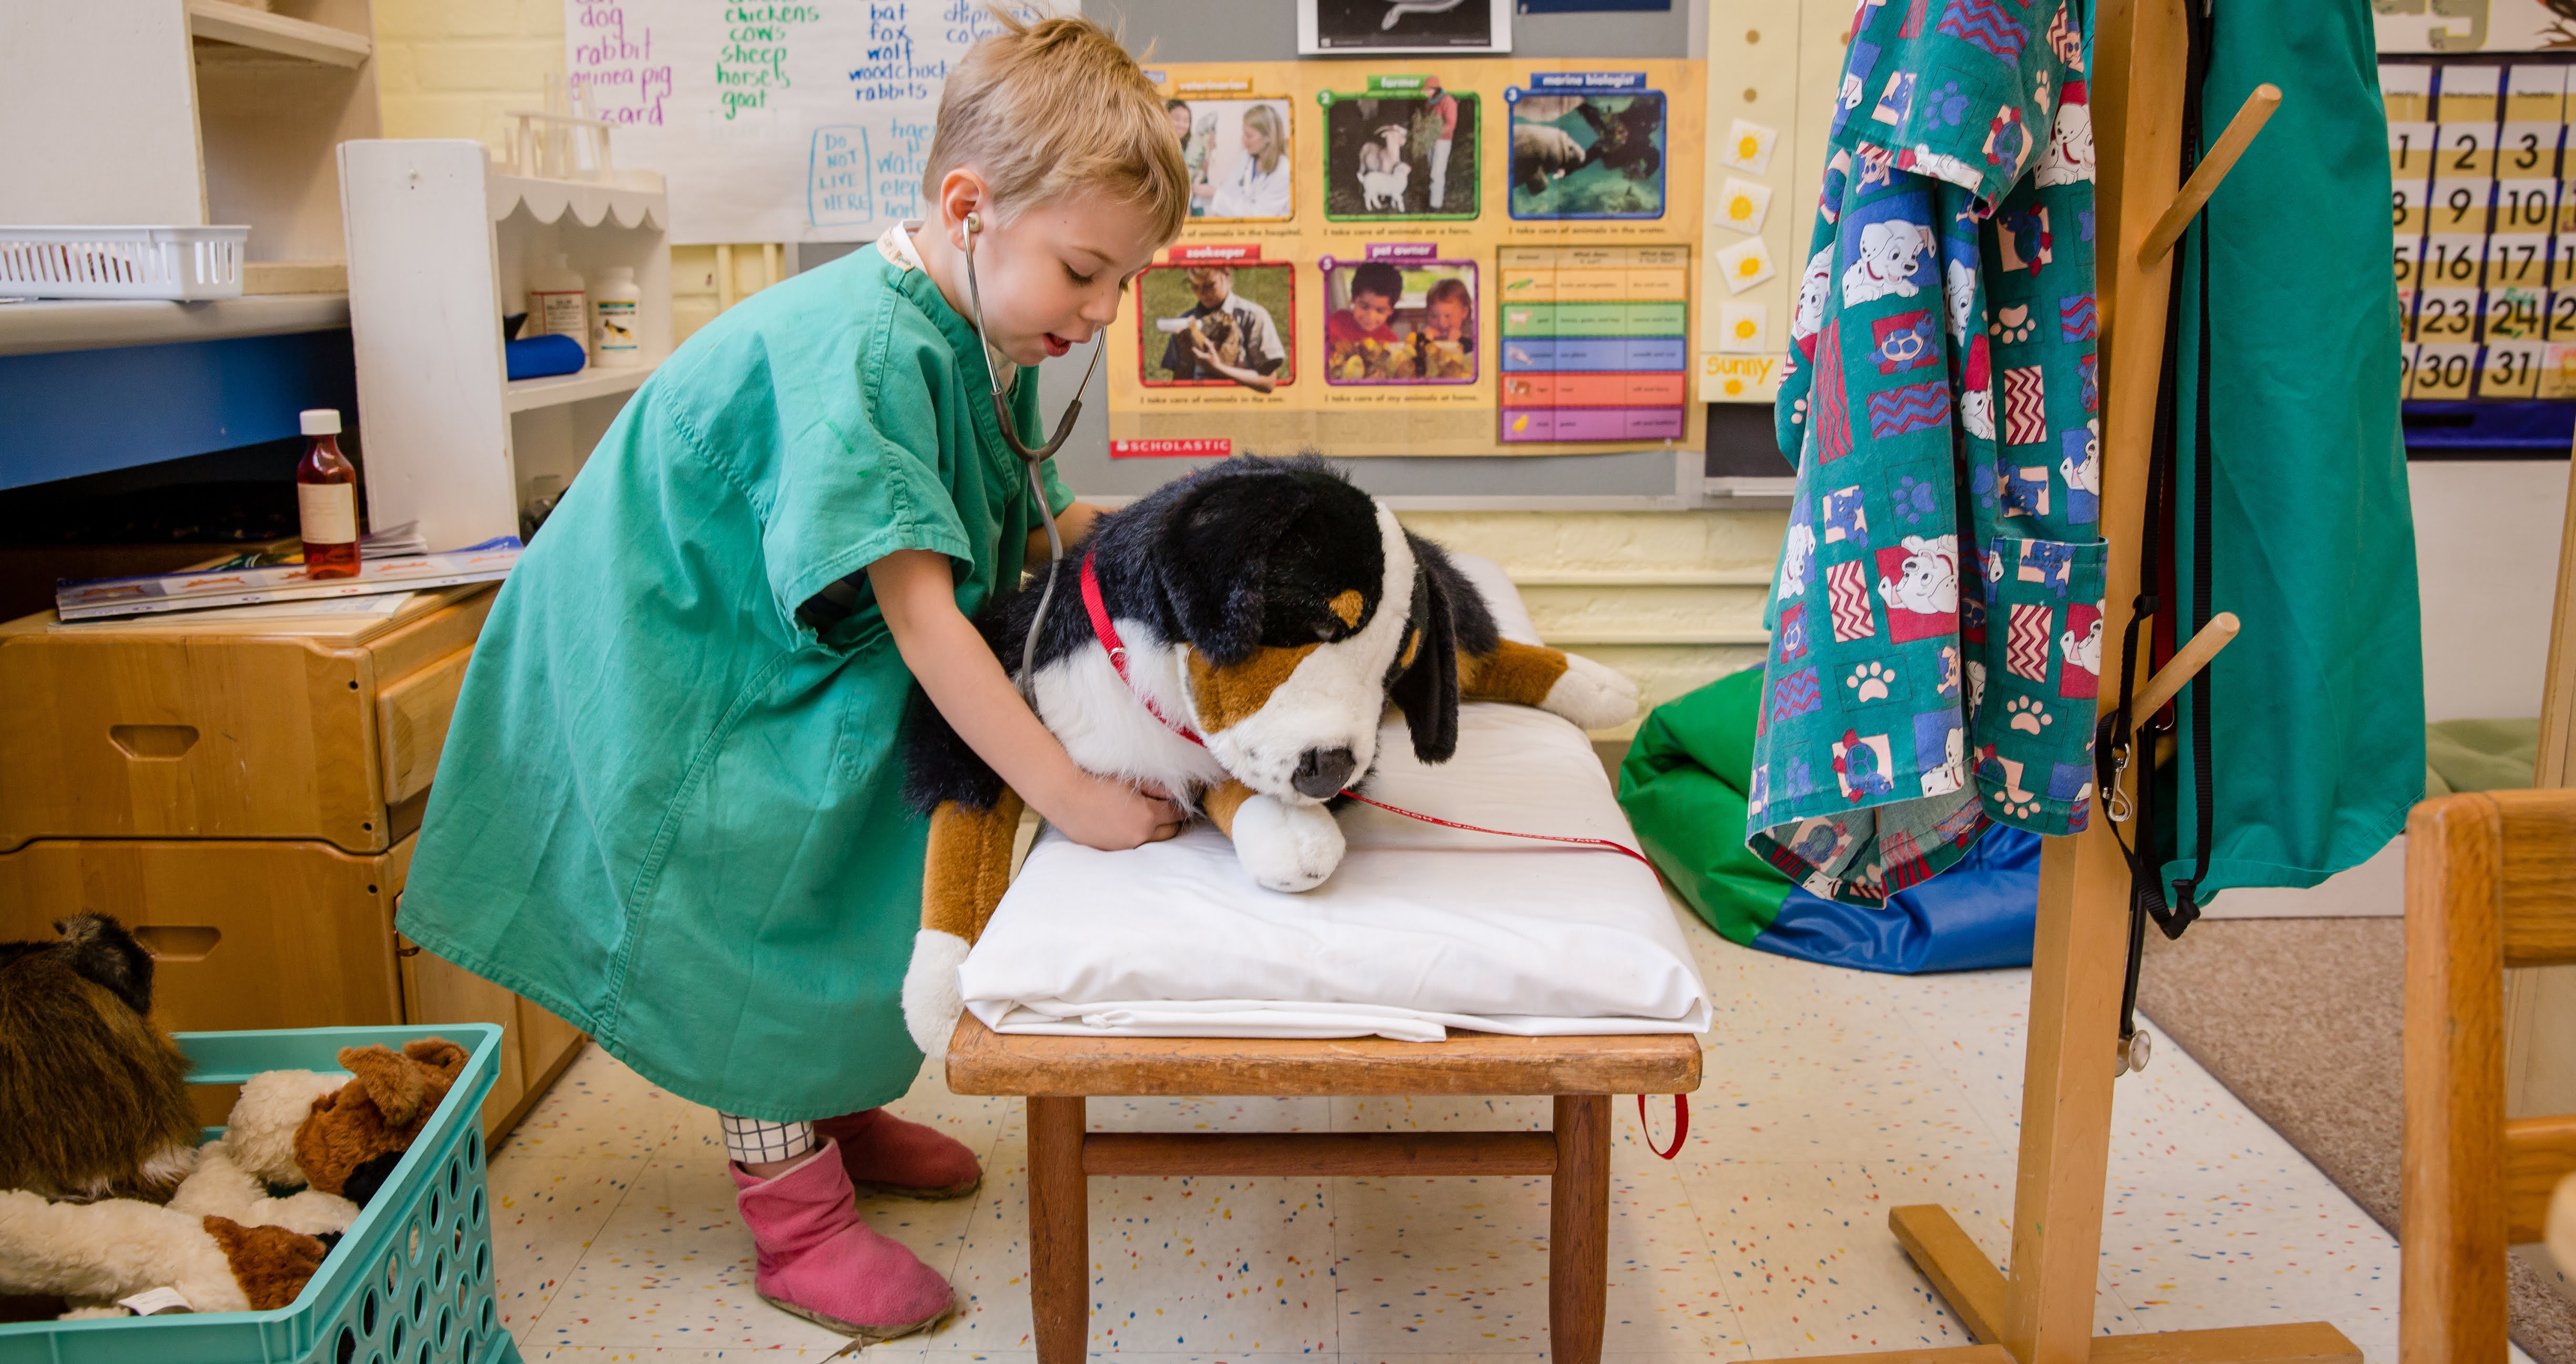 A student wearing scrubs examines a stuffed animal with a stethescope